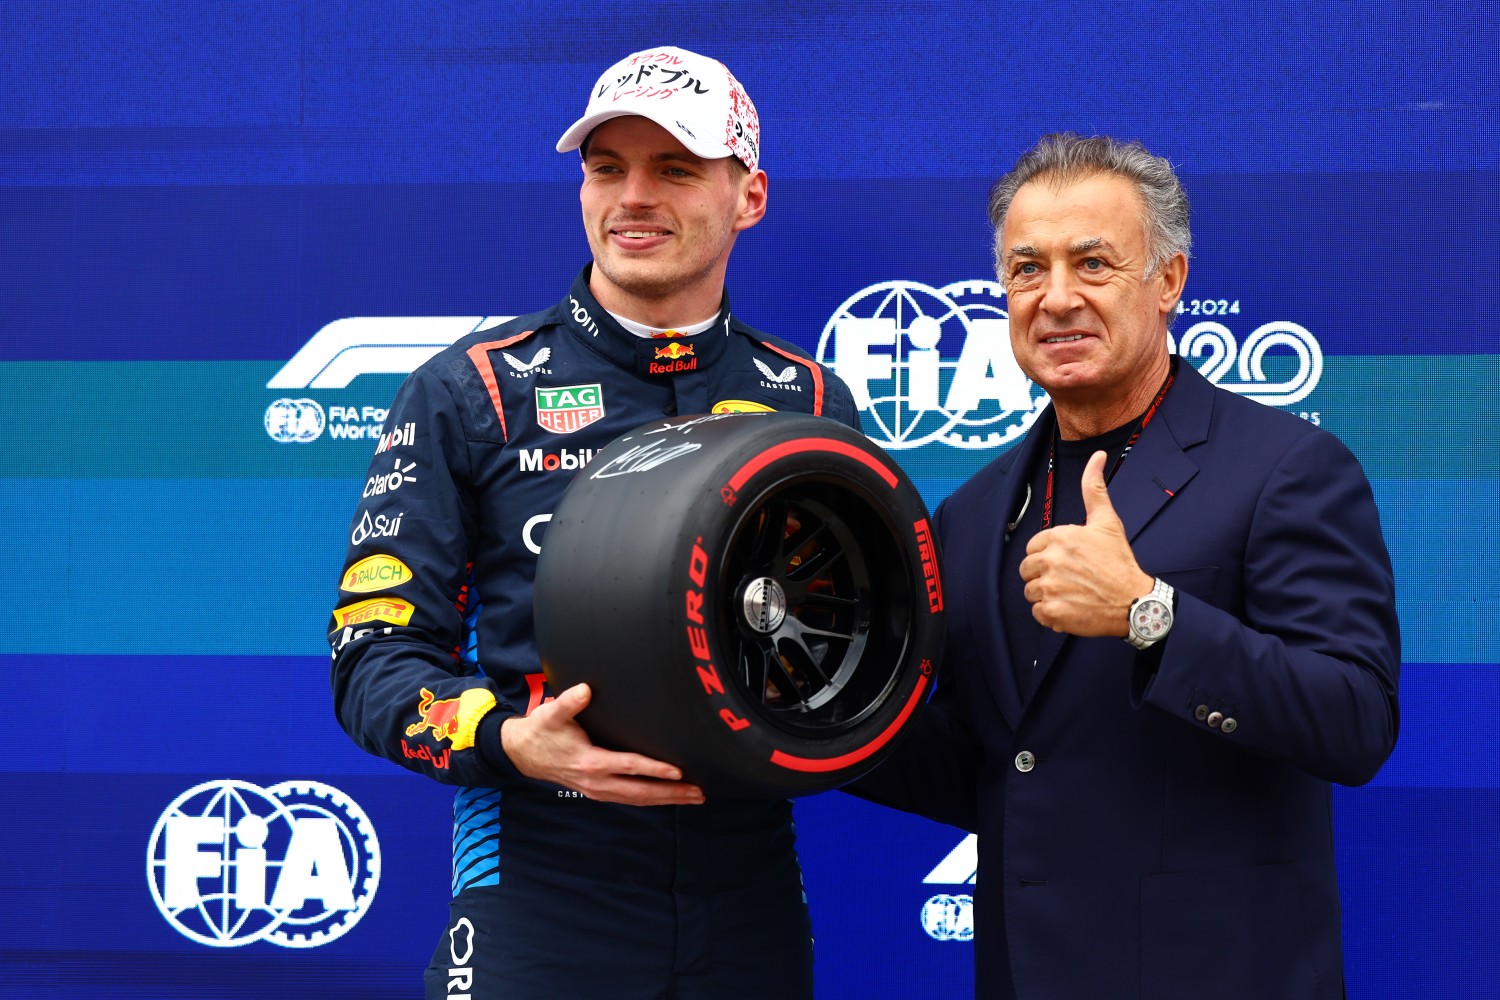 Pole position qualifier Max Verstappen of the Netherlands and Oracle Red Bull Racing is presented with the Pirelli Pole Position trophy by Jean Alesi in parc ferme during qualifying ahead of the F1 Grand Prix of Japan at Suzuka International Racing Course on April 06, 2024 in Suzuka, Japan. (Photo by Mark Thompson/Getty Images)